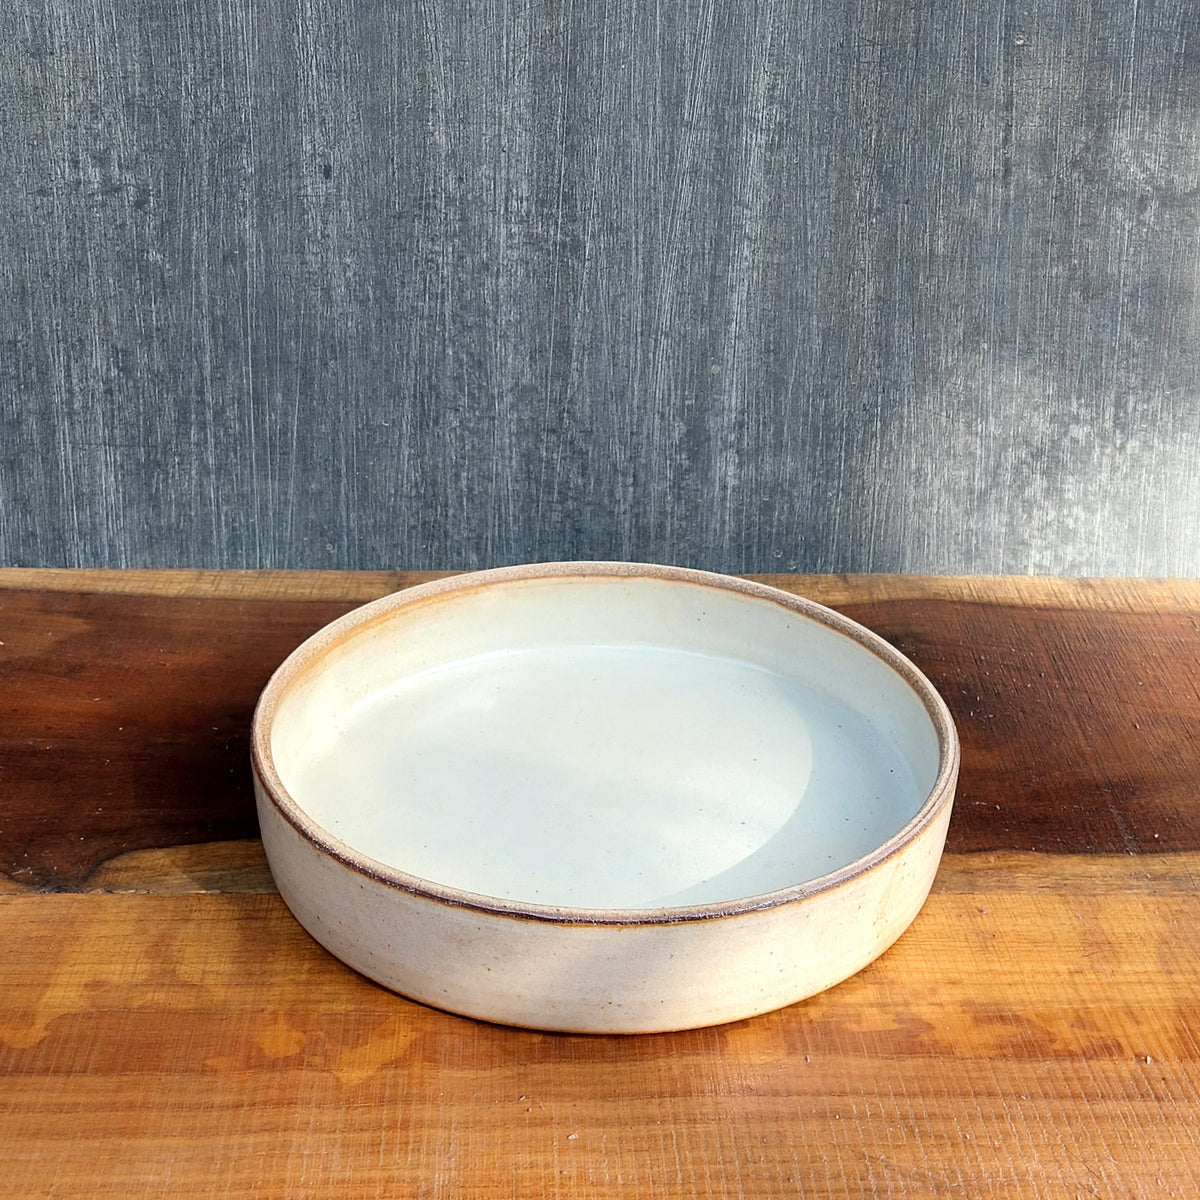 Ana Pasta Plate- Beige/Brown (Set of 2 plates)